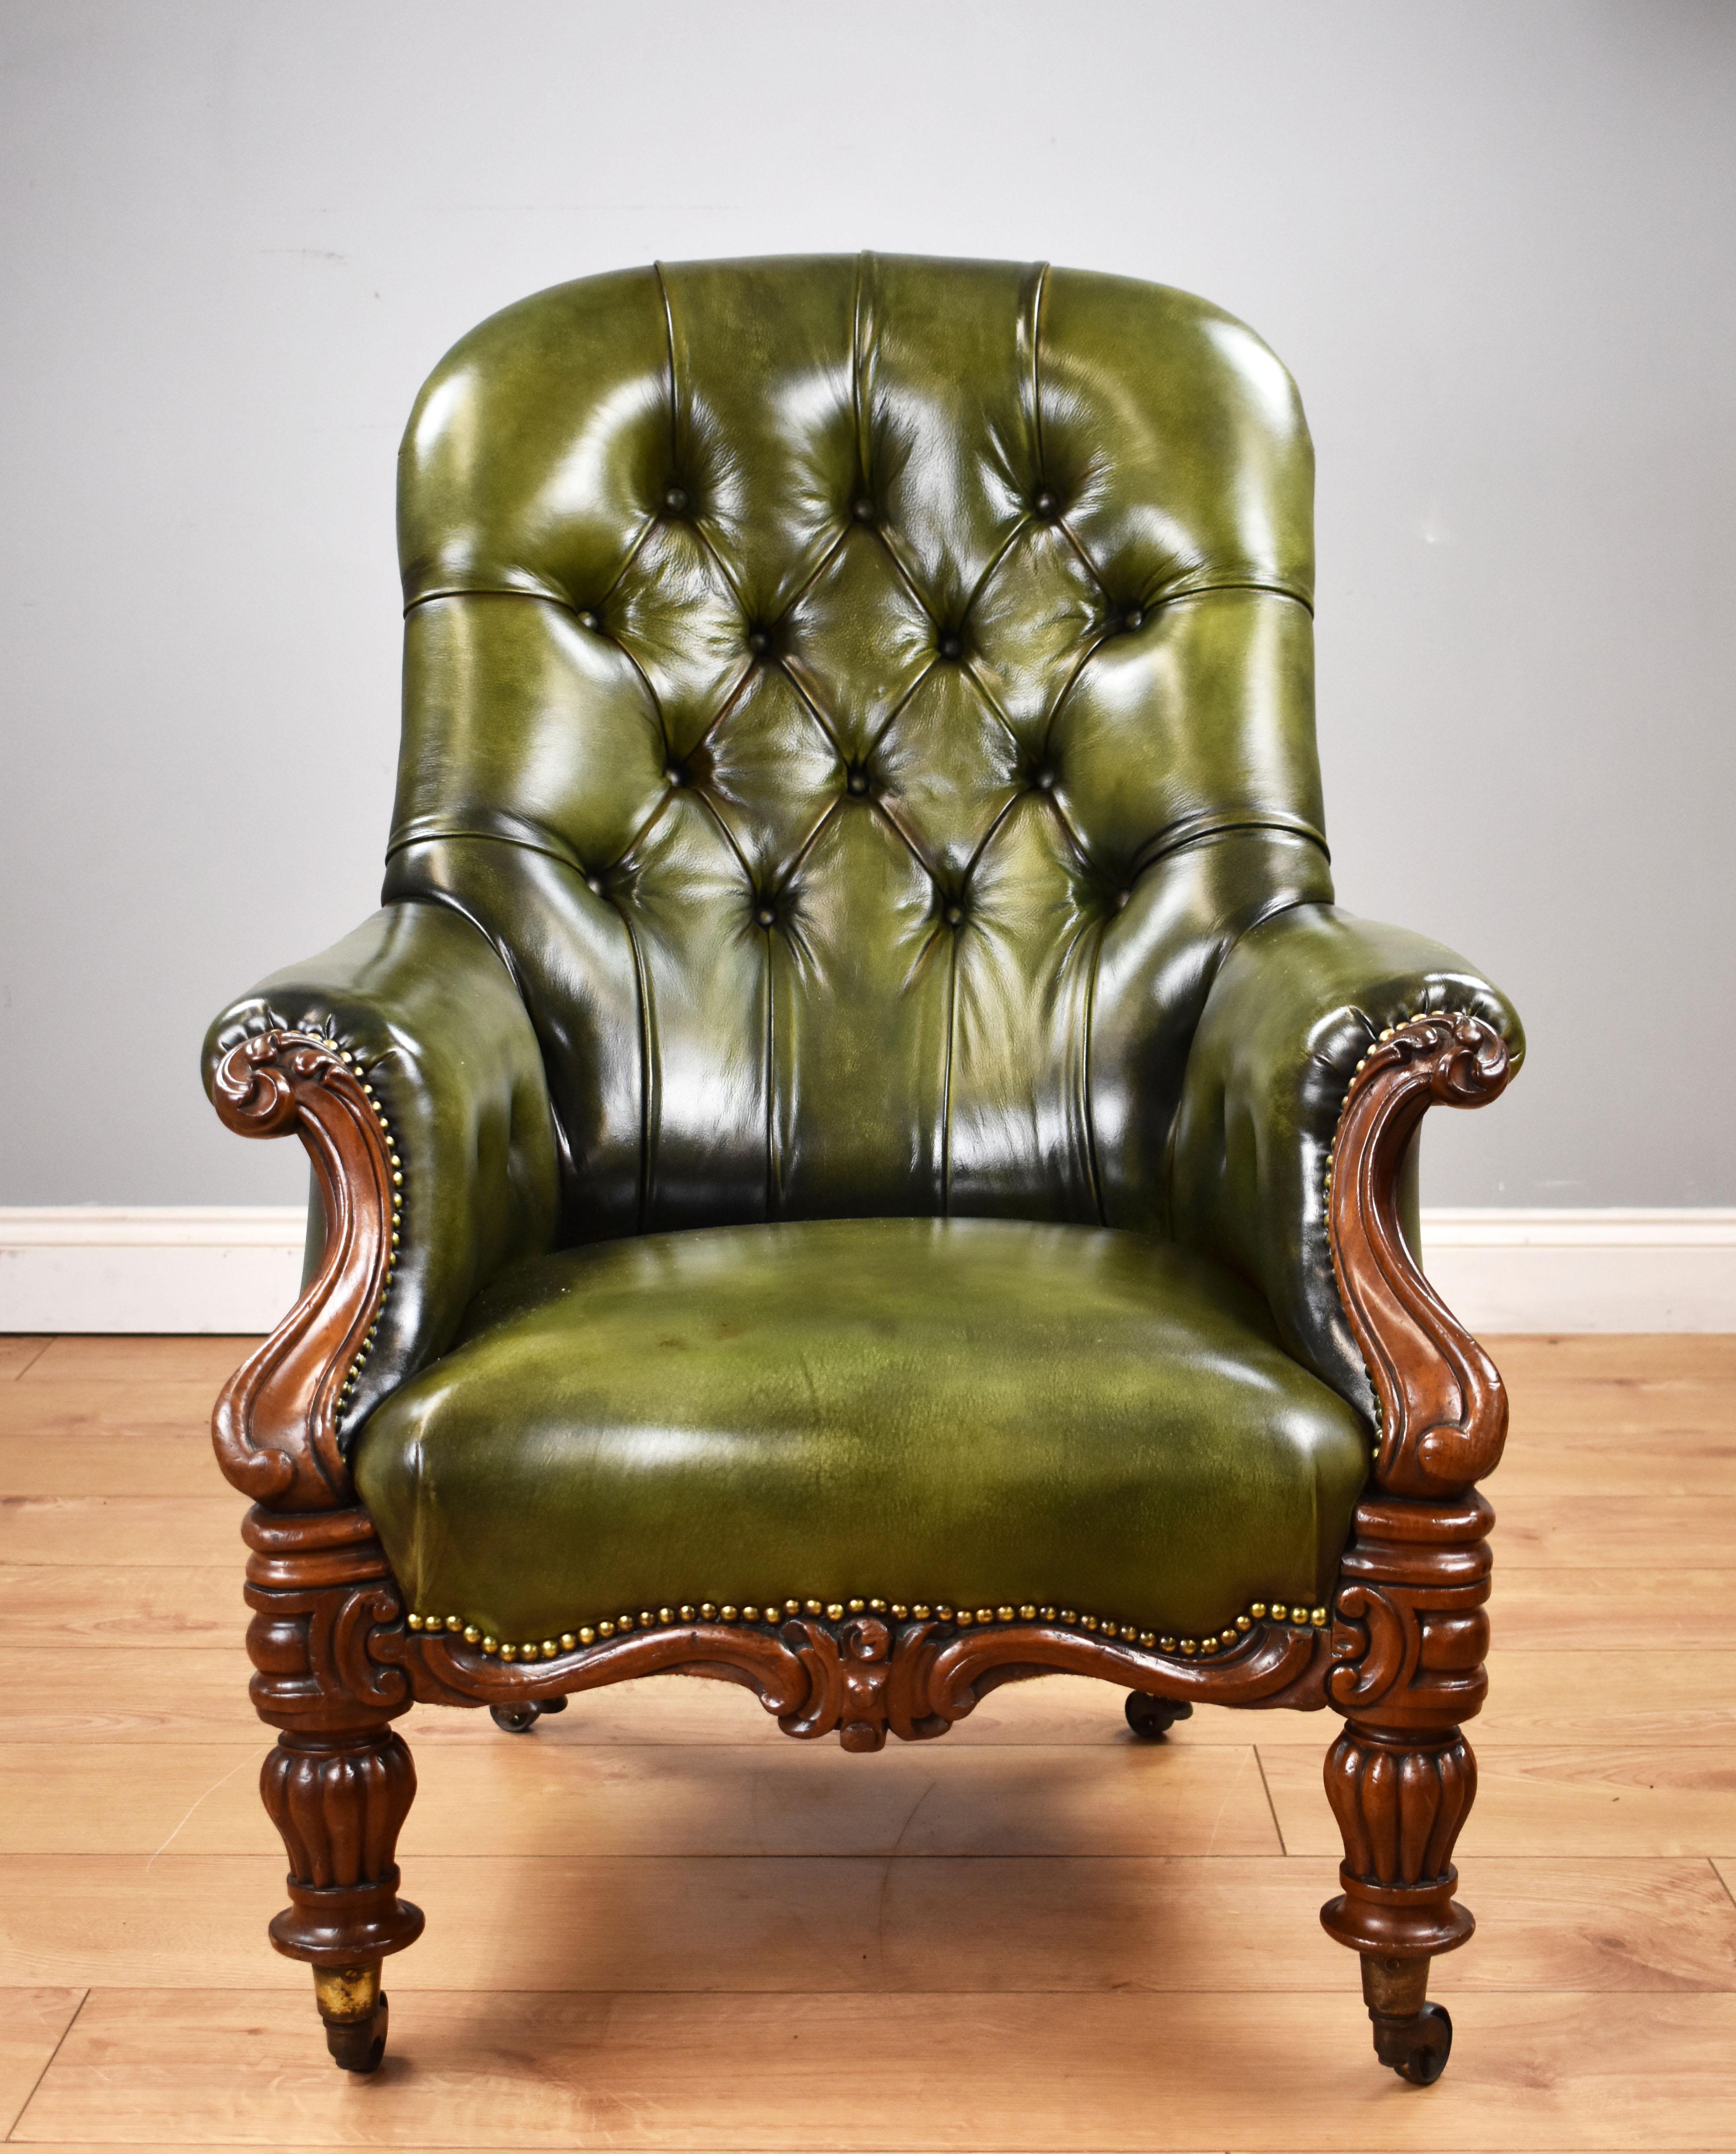 For sale is a good quality William IV hand dyed green leather library chair. Upholstered in good quality leather hide and then hand coloured to a lovely antique green finish, the chair has a deep buttoned back, above scroll arms with a superbly